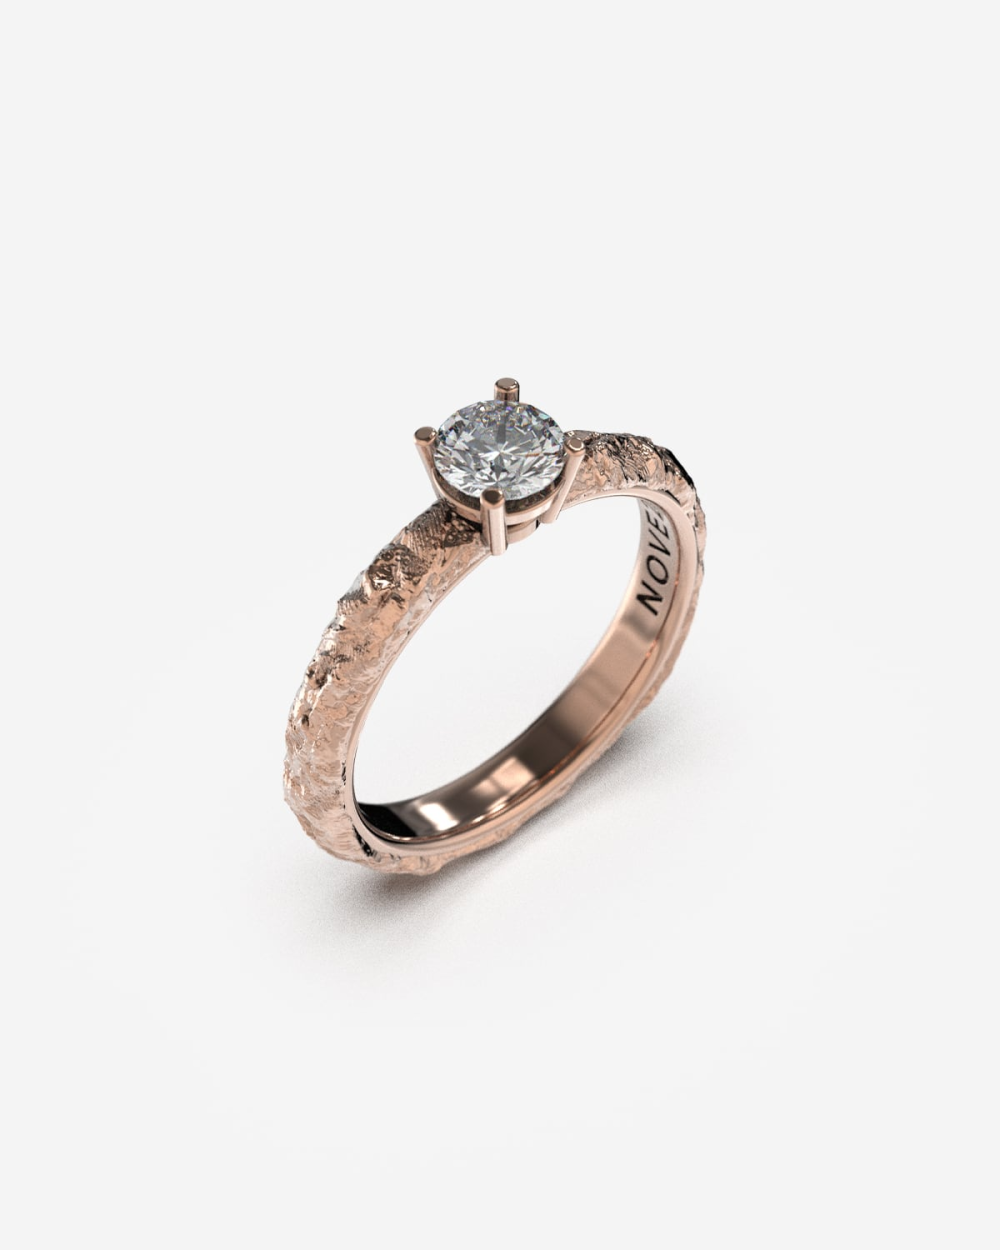 SILVER ROCK SOLITAIRE ENGAGEMENT RING